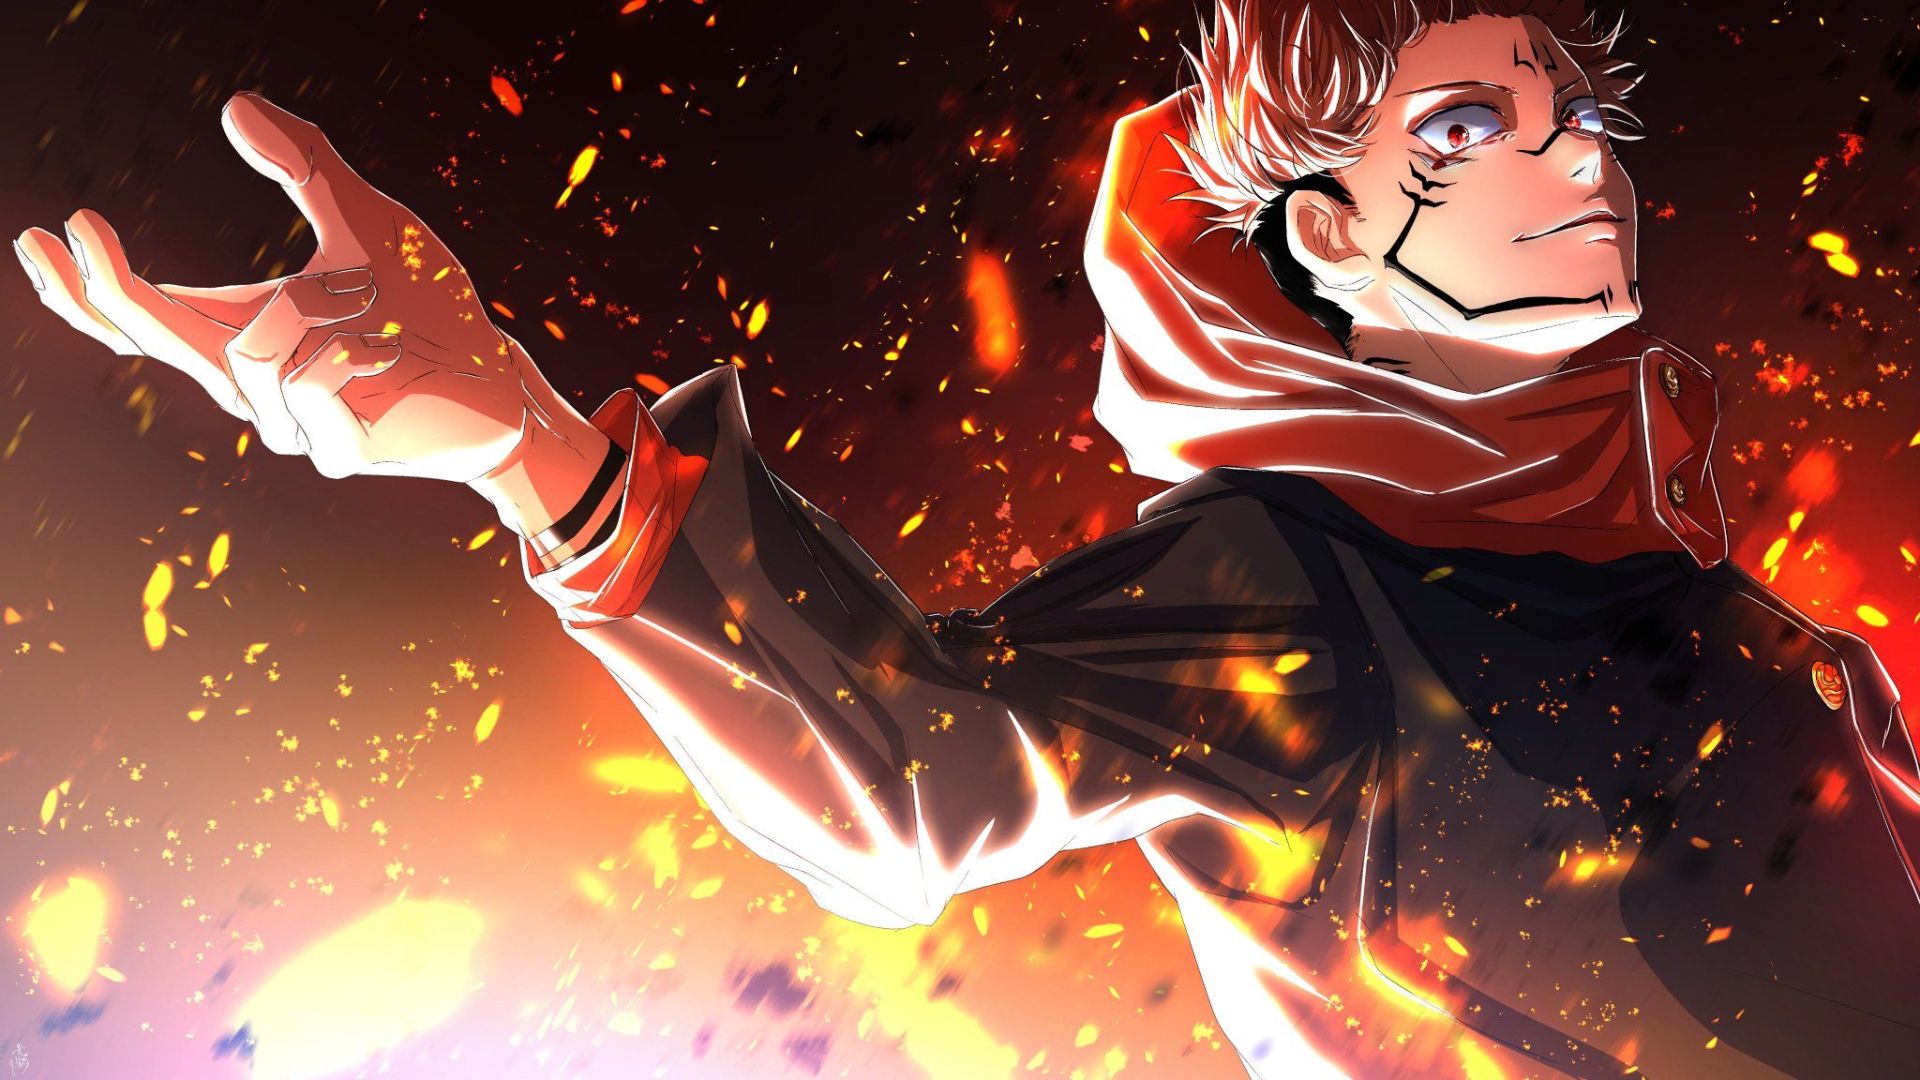 Dope Anime Wallpapers - Top 34 Best Dope Anime Wallpapers Download